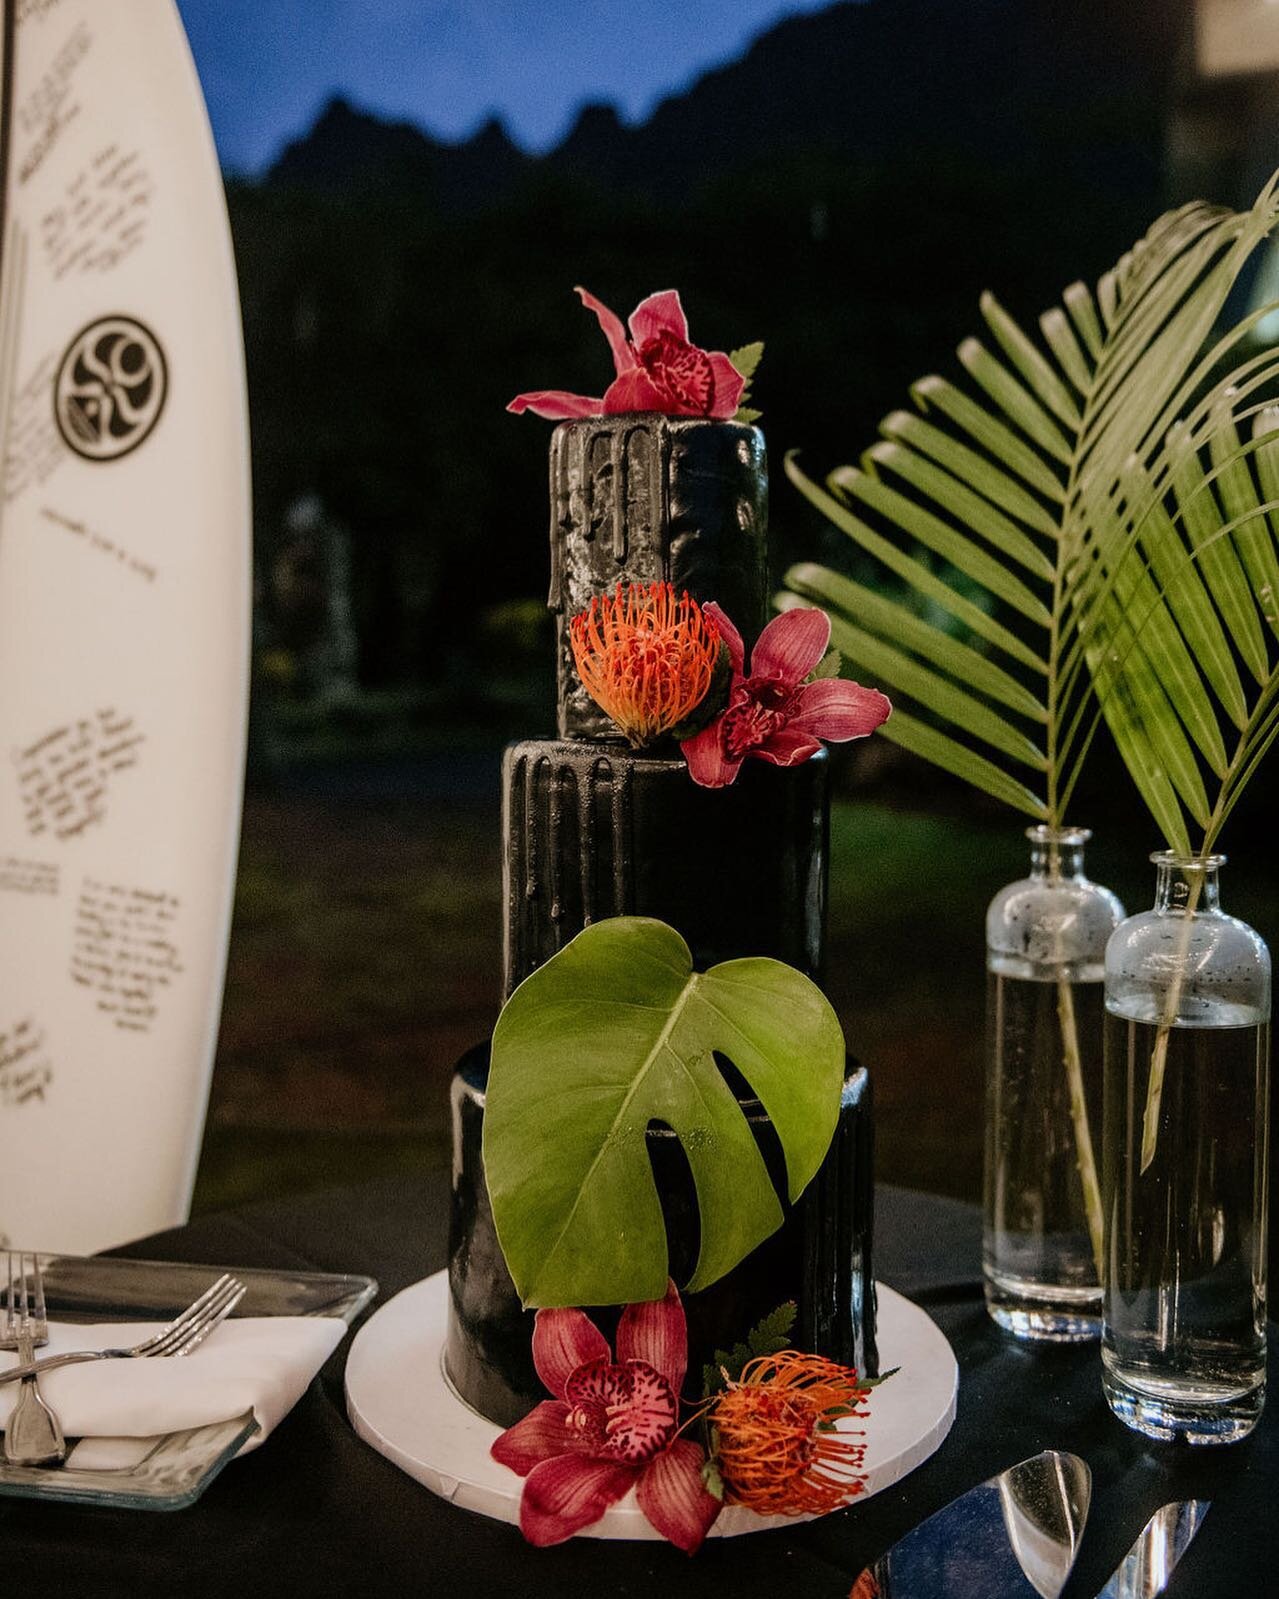 A tropical cake with black vibes can't be done... or can it? 😍

Planning+Coordination: @fredandkateevents
Venue@kualoaranch
Hair+make-up: @revealhairandmakeup
Photo: @derekwongphotography
Catering: @kenekeswaimanalo
Florist: @wngchaiwaii
Rentals: @e